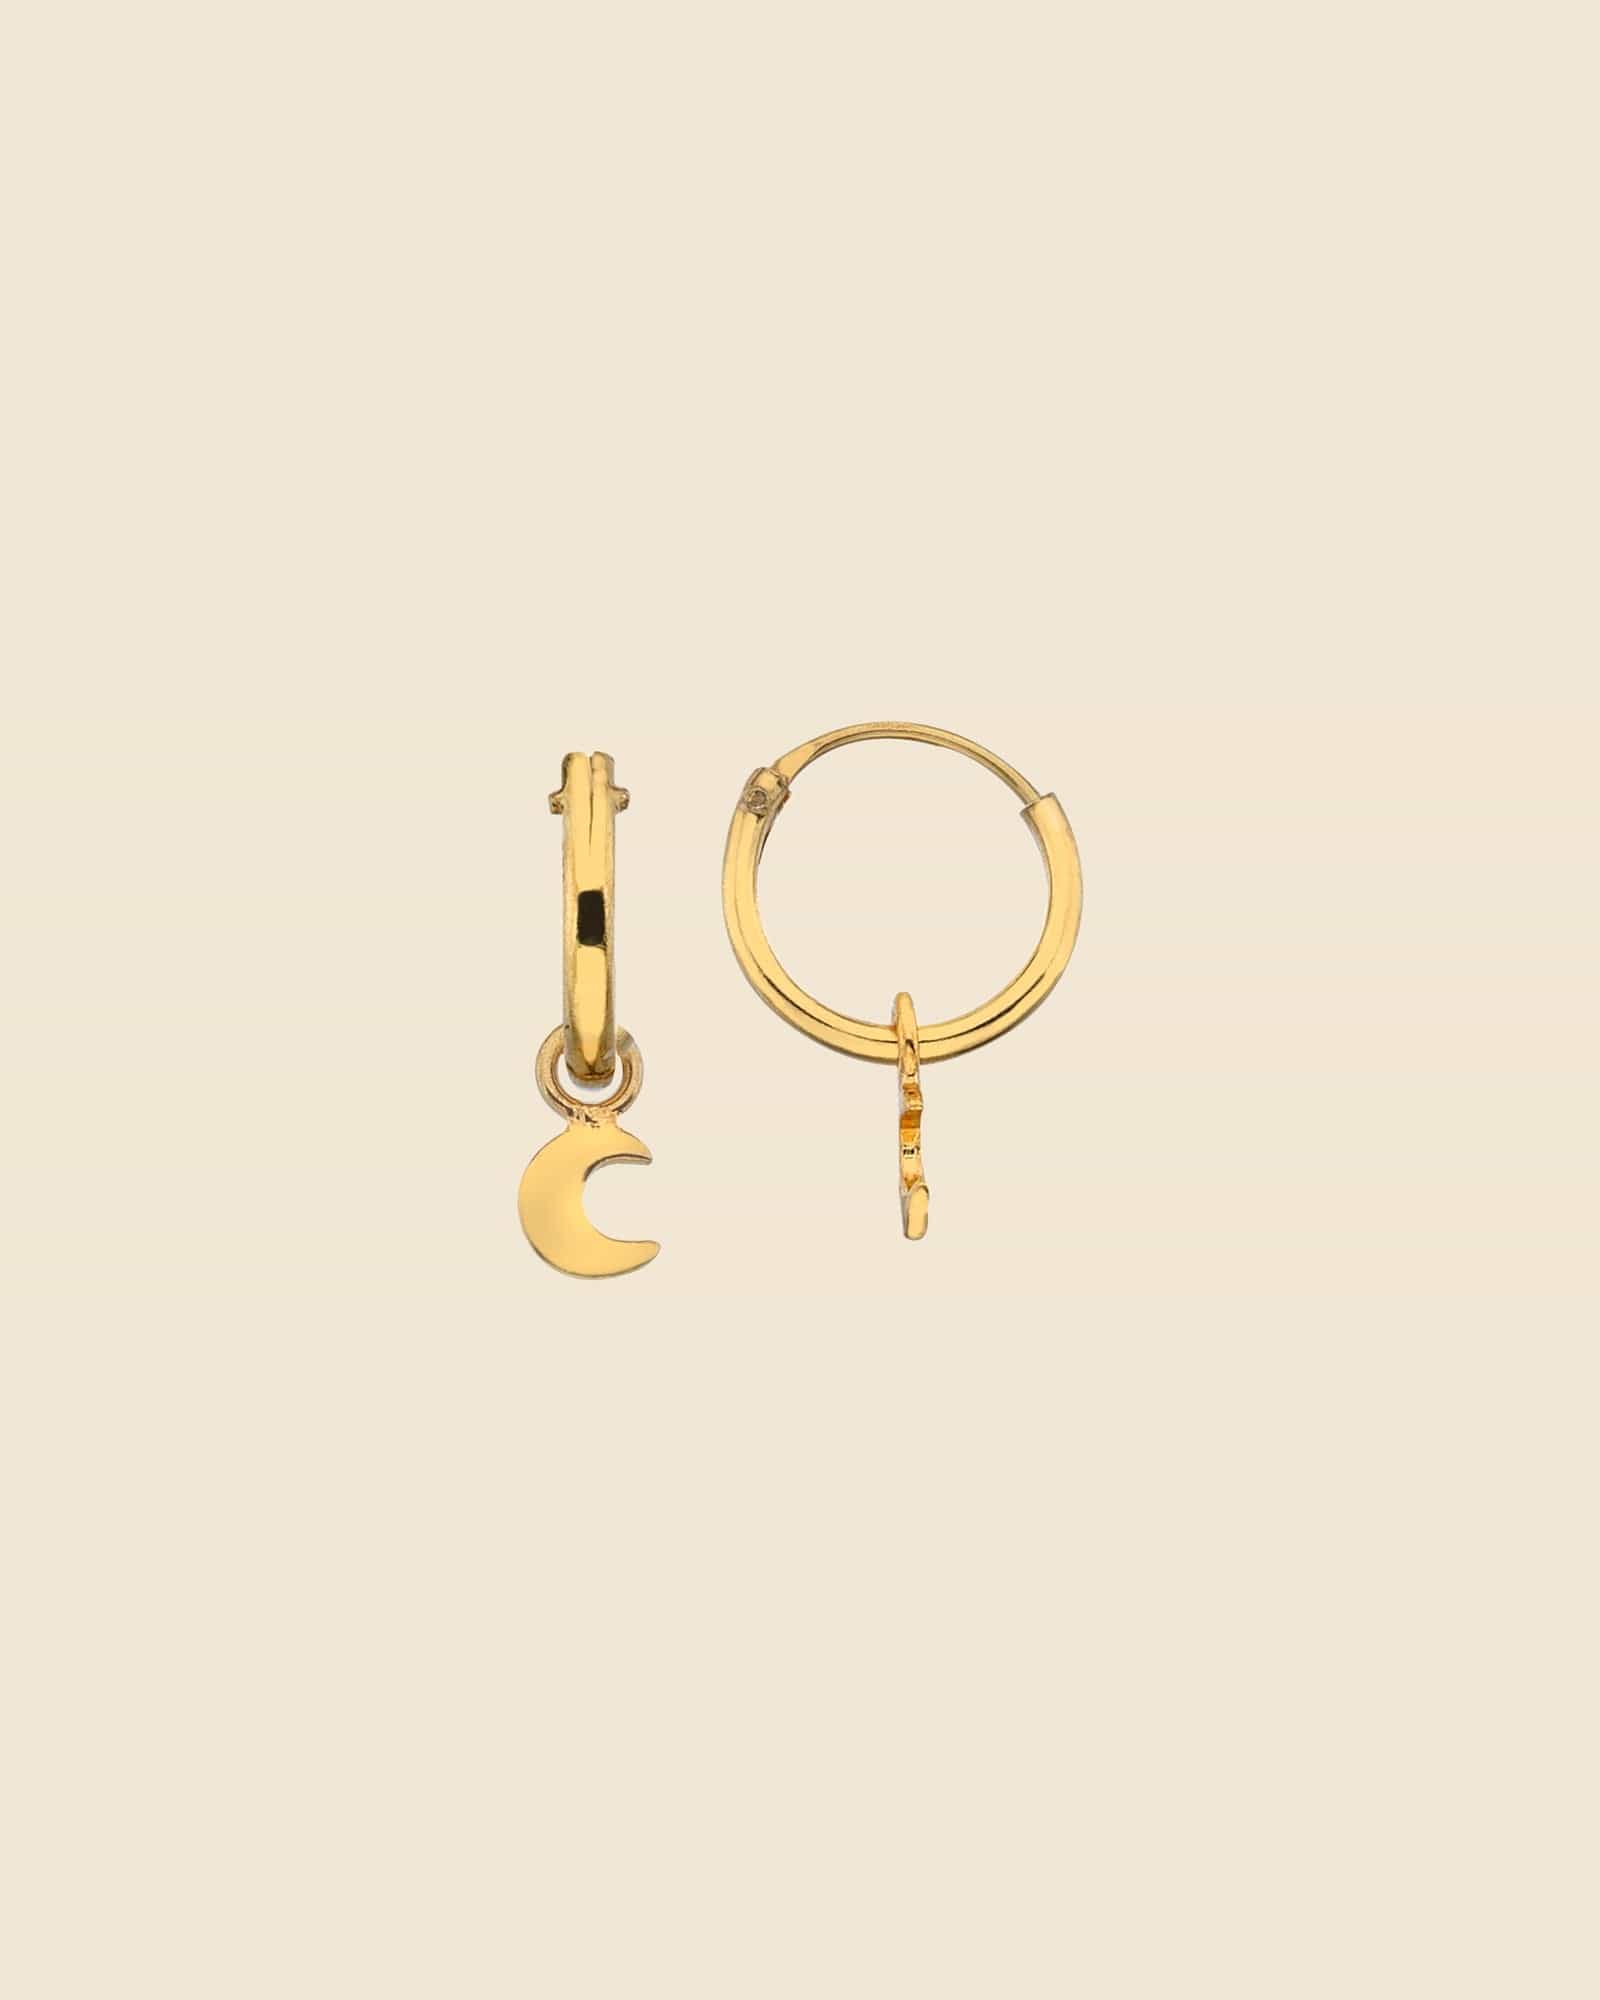 Gold Plated 10mm Hoop with Mini Moon Charm